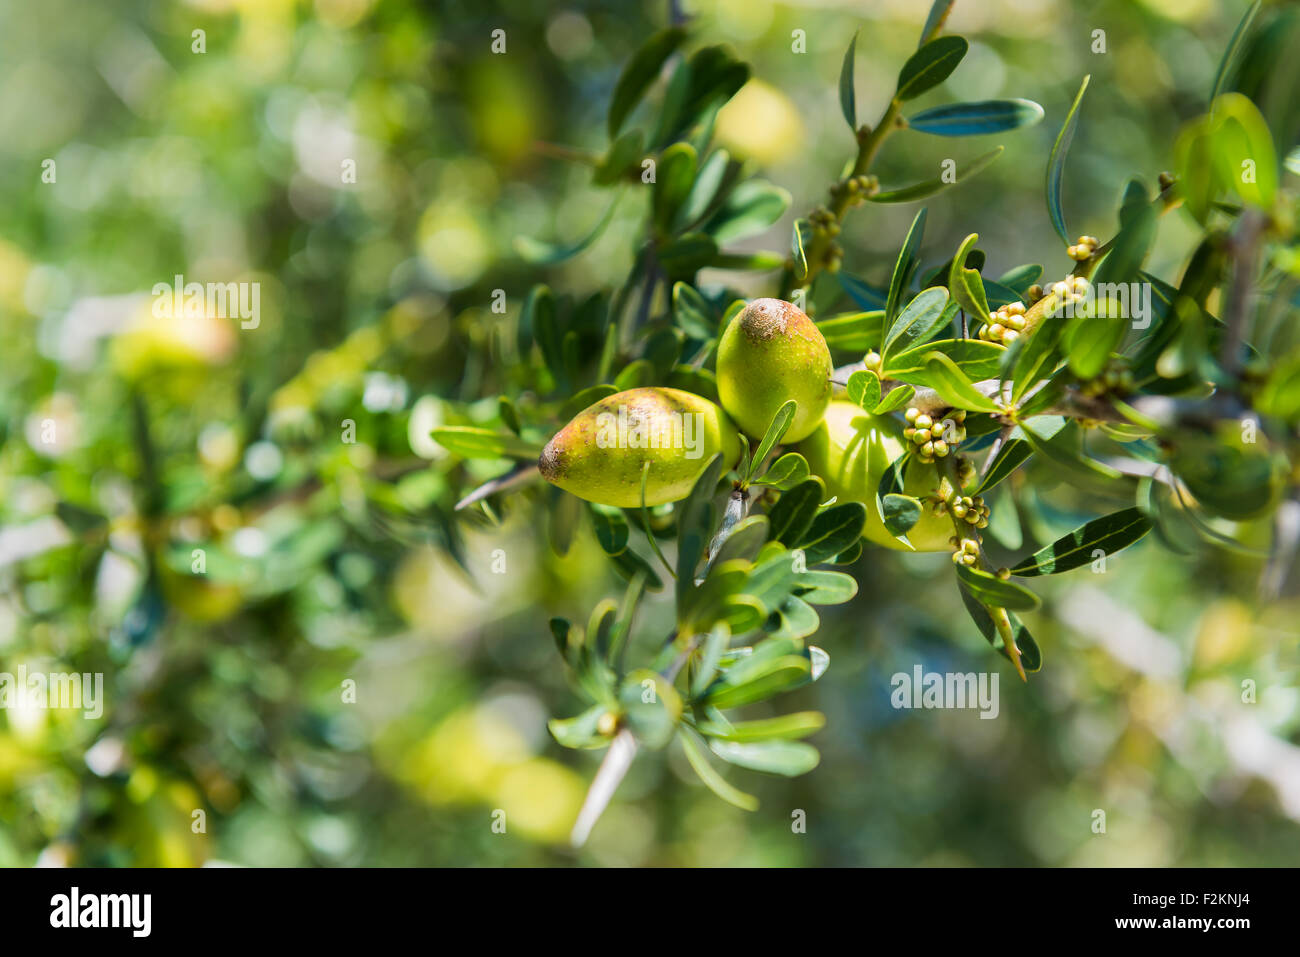 Branch of argan tree full of fresh and green fruits. Argan fruits are ...